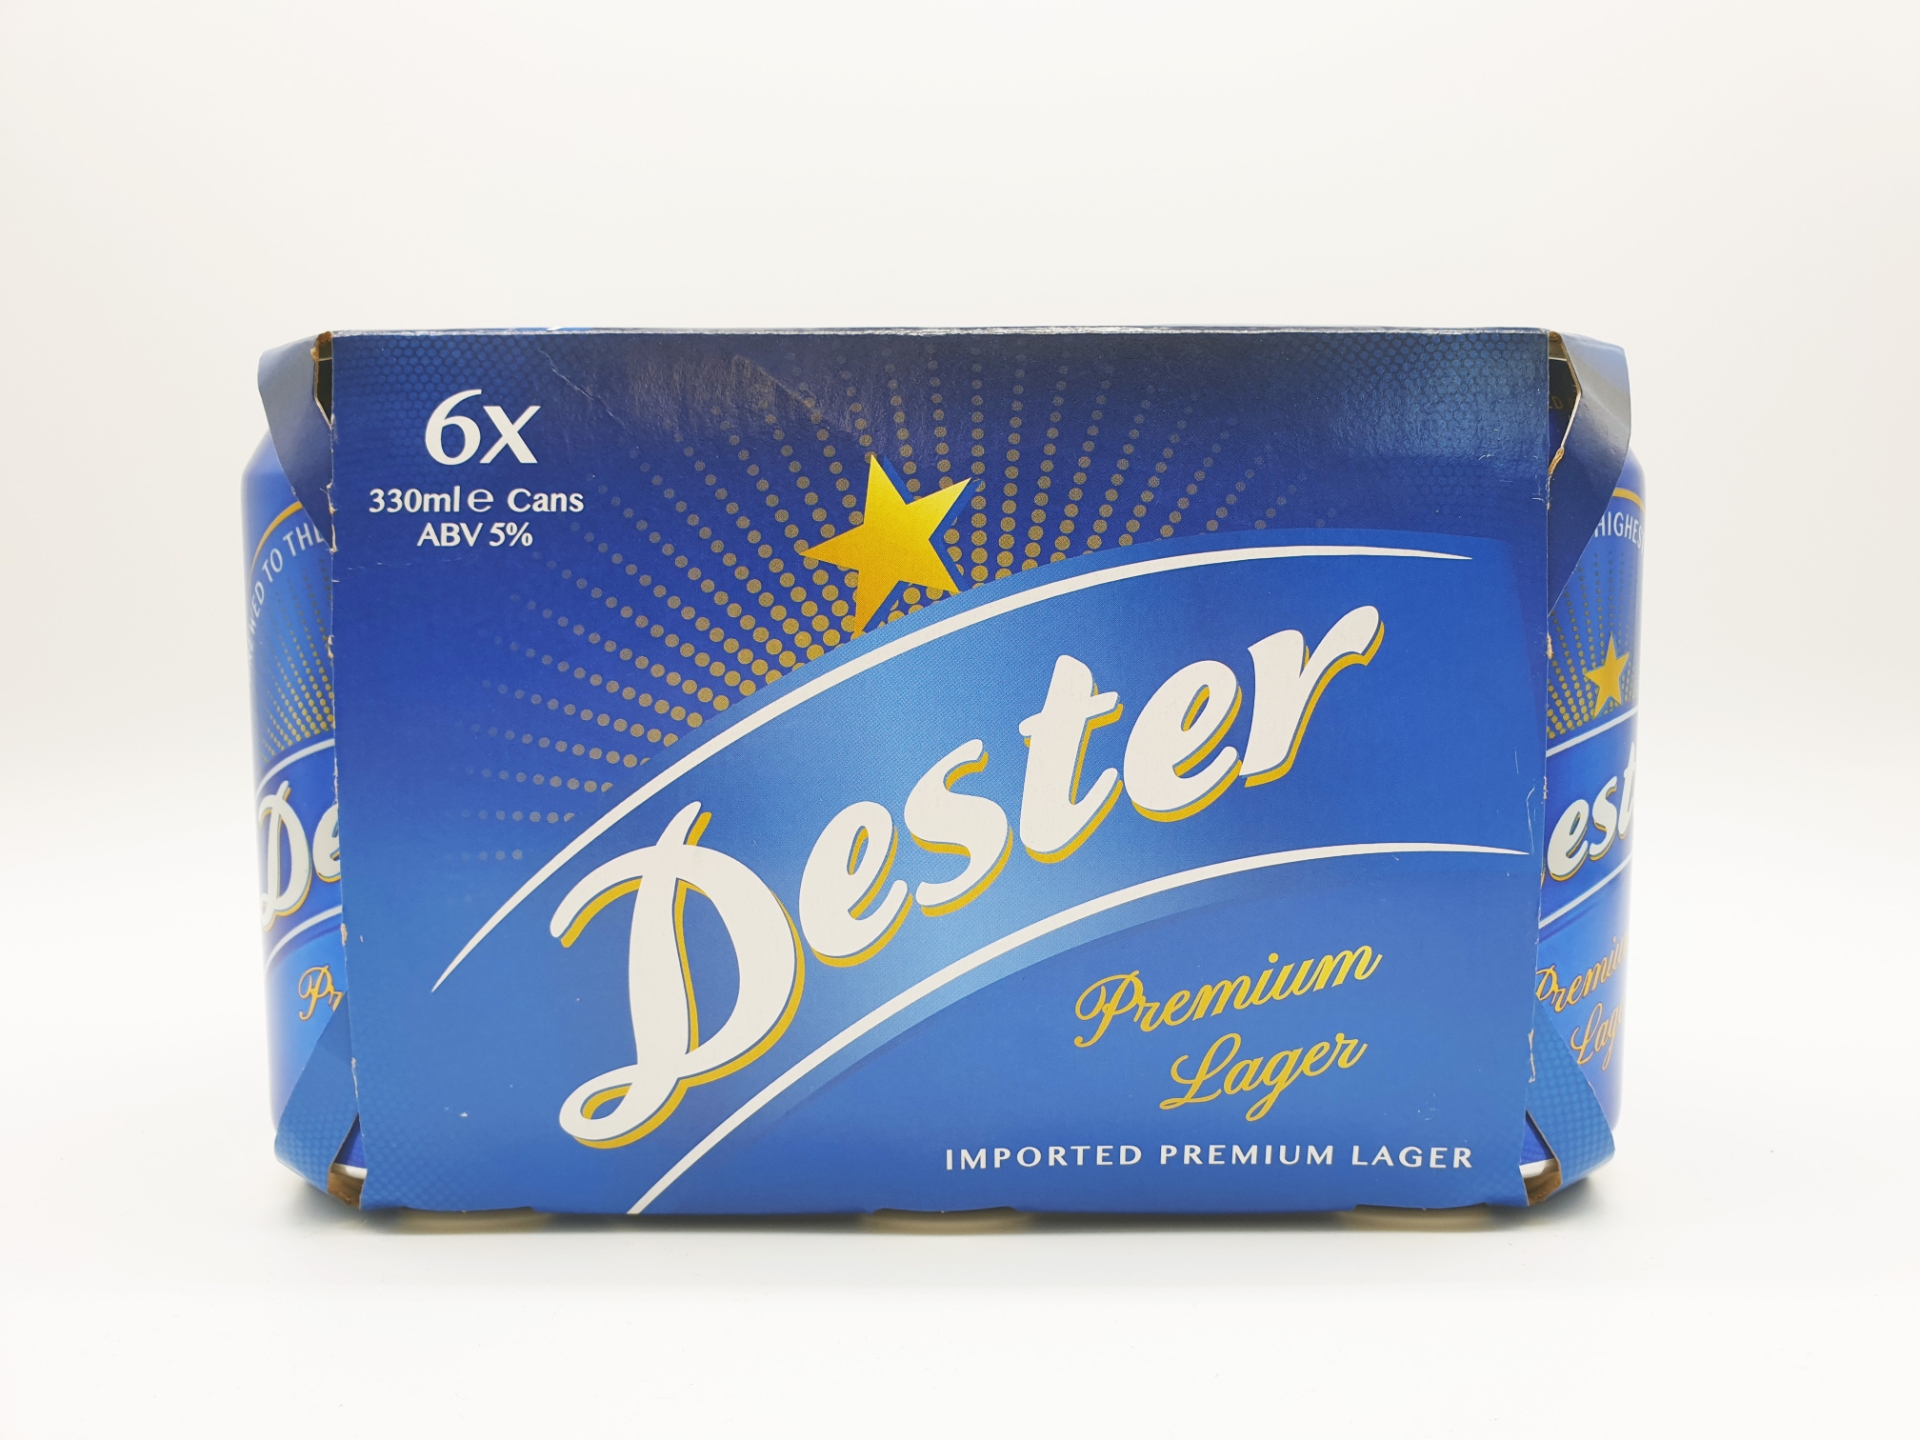 Dester Premium Lager Can Beer (24 cans x 330ml)